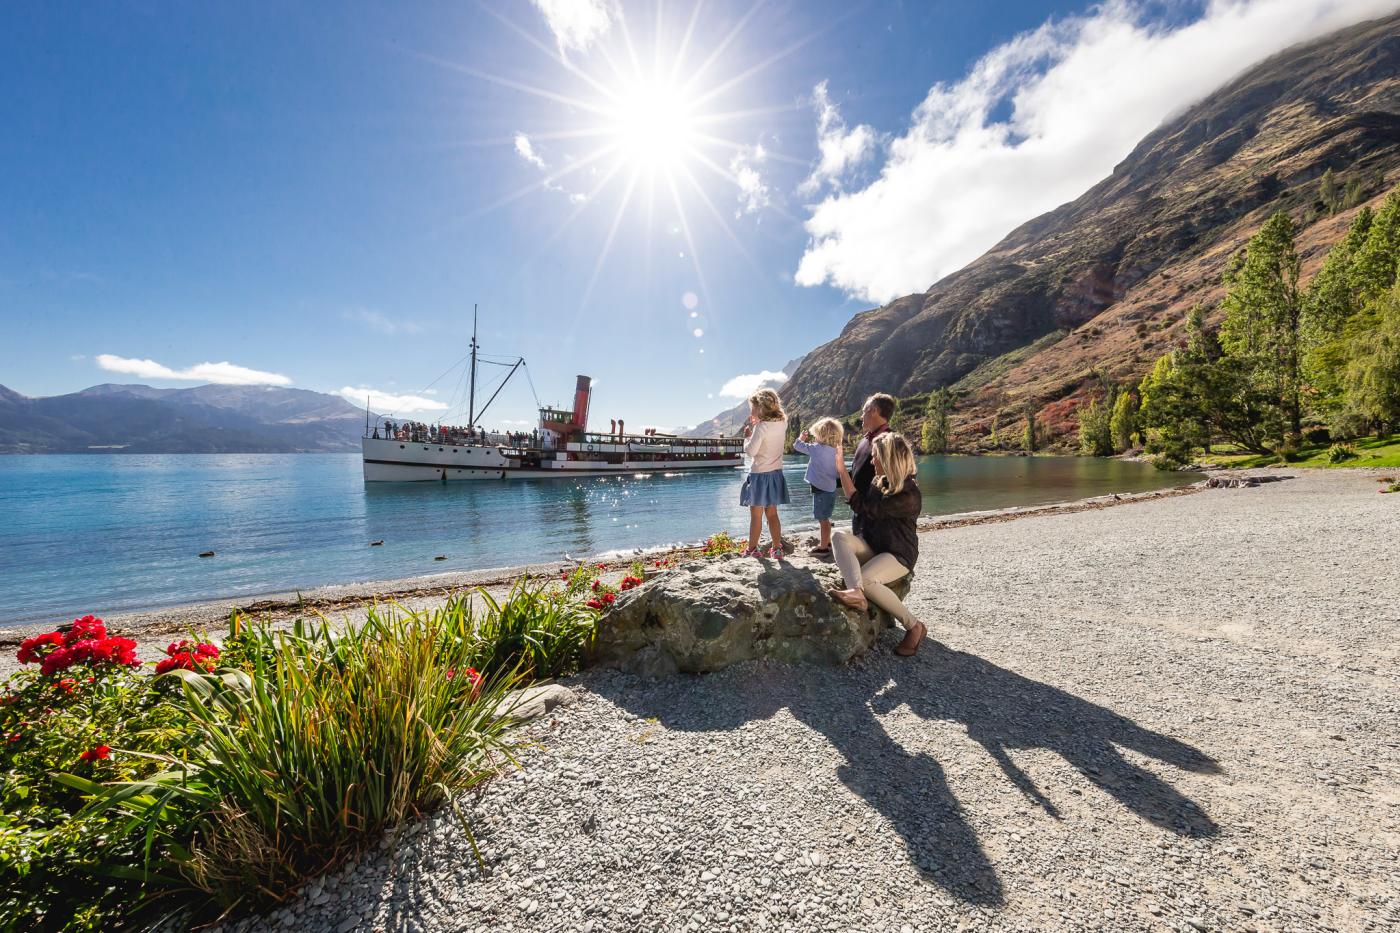 Family at Walter Peak watching the TSS Earnslaw steamship